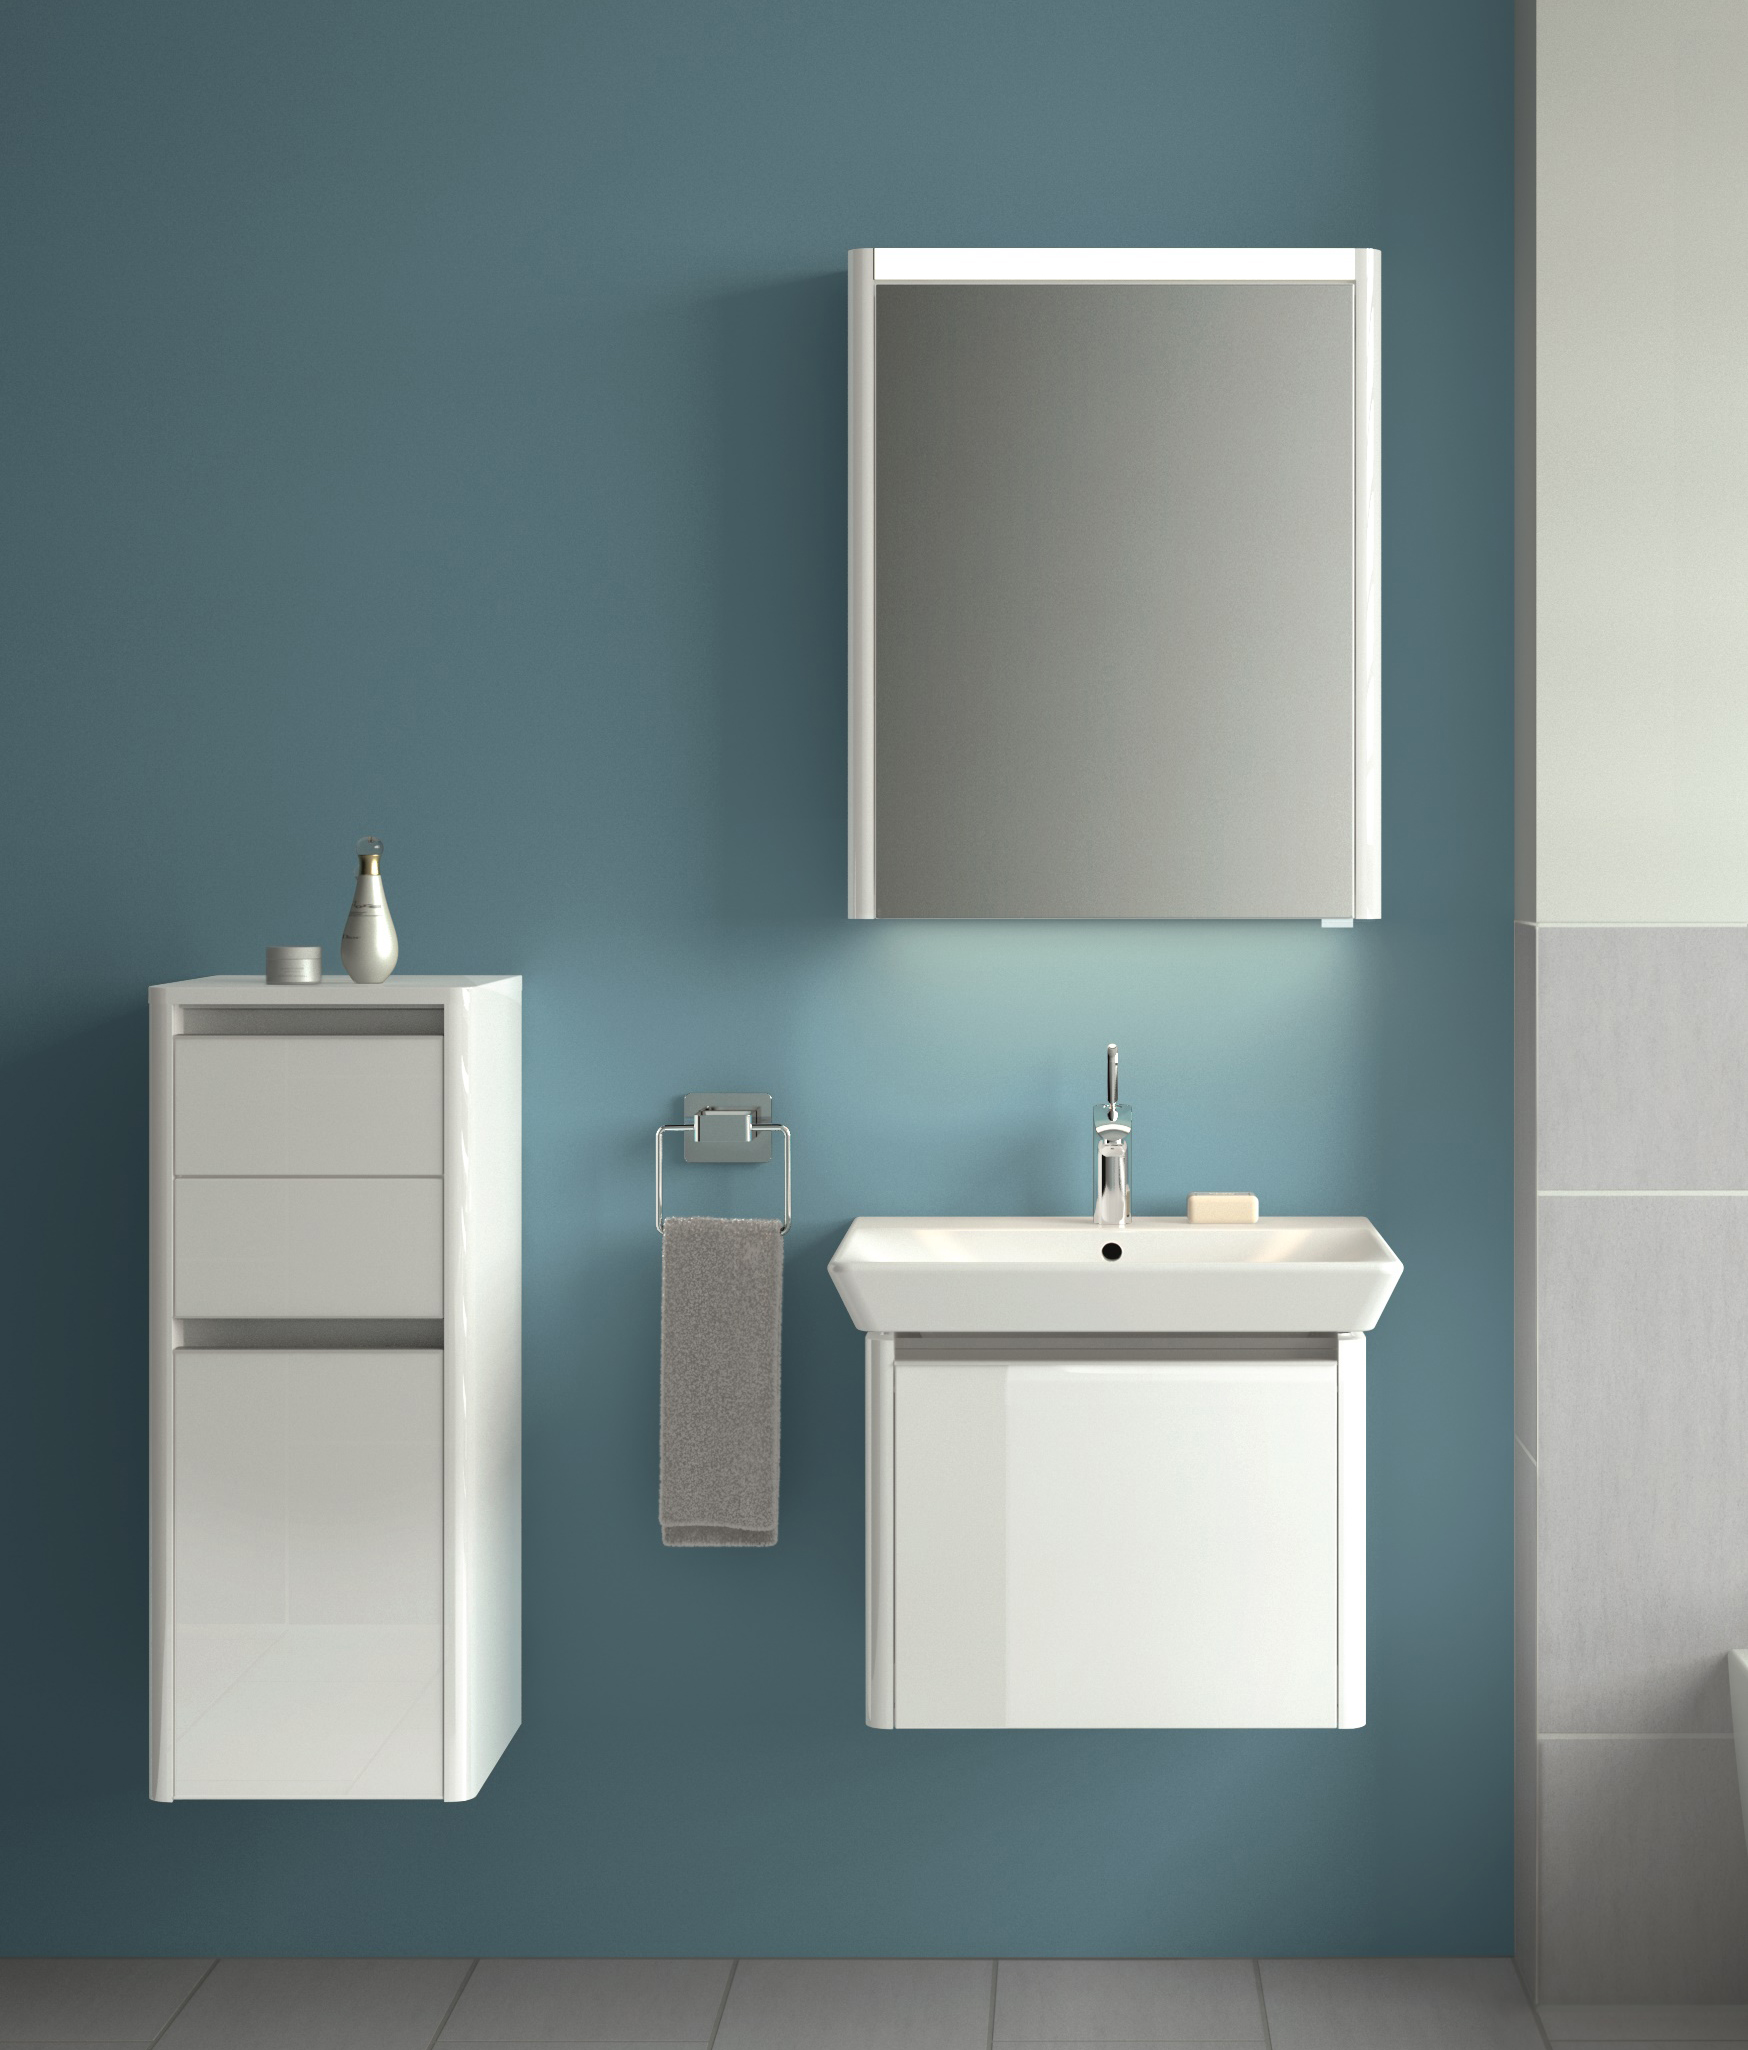 Discussing wall hung bathrooms with VitrA